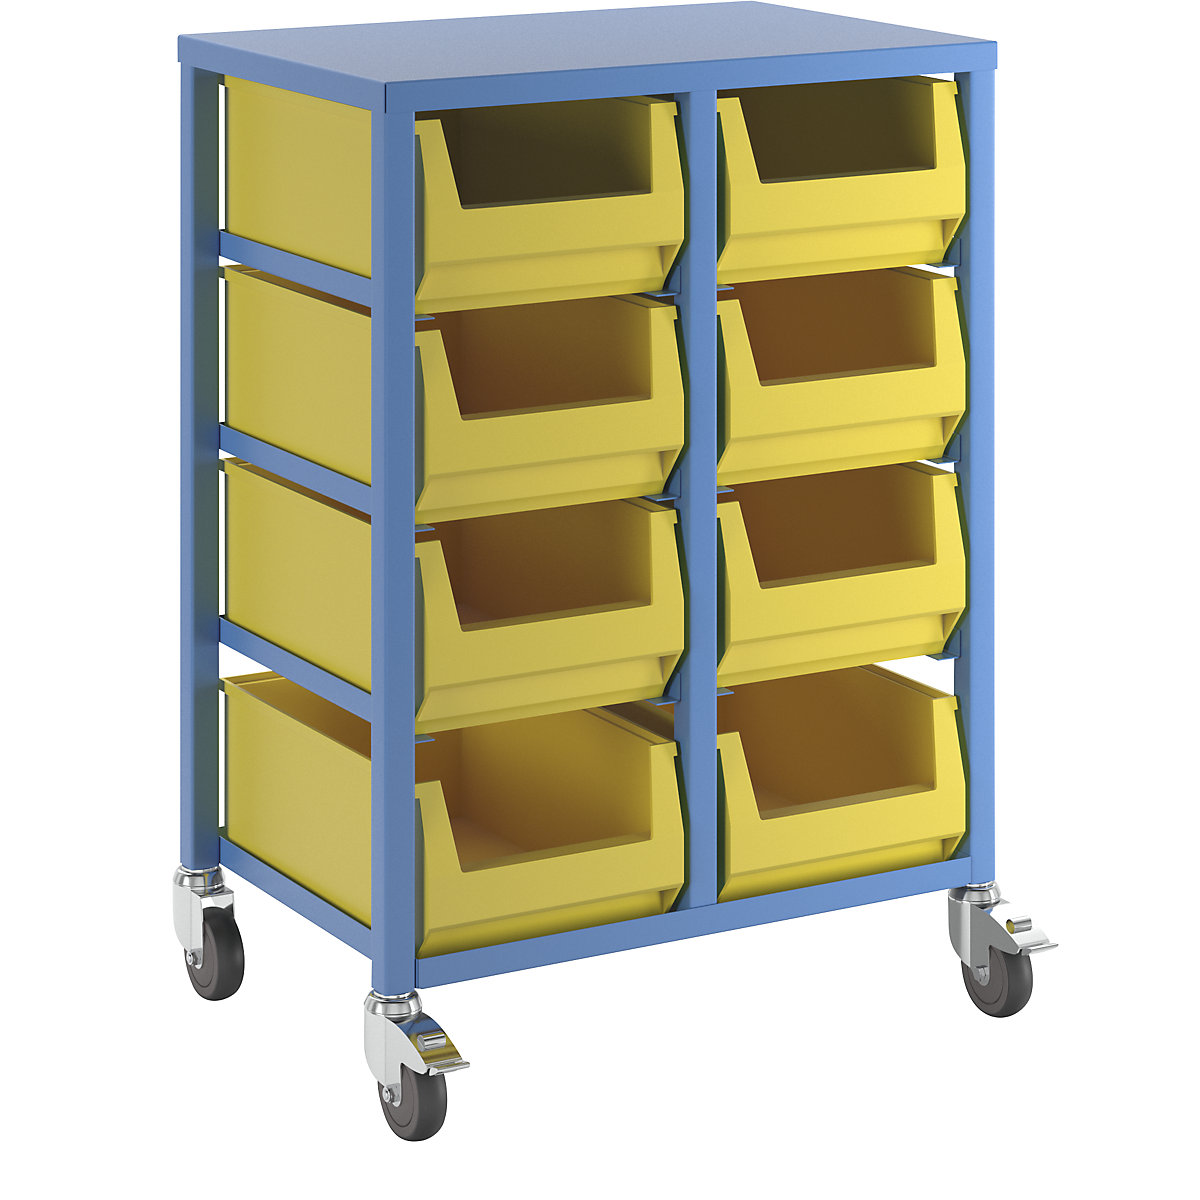 Order picking trolley – eurokraft pro, light blue RAL 5012, height 1050 mm, with 8 x 23 litre plastic containers-1